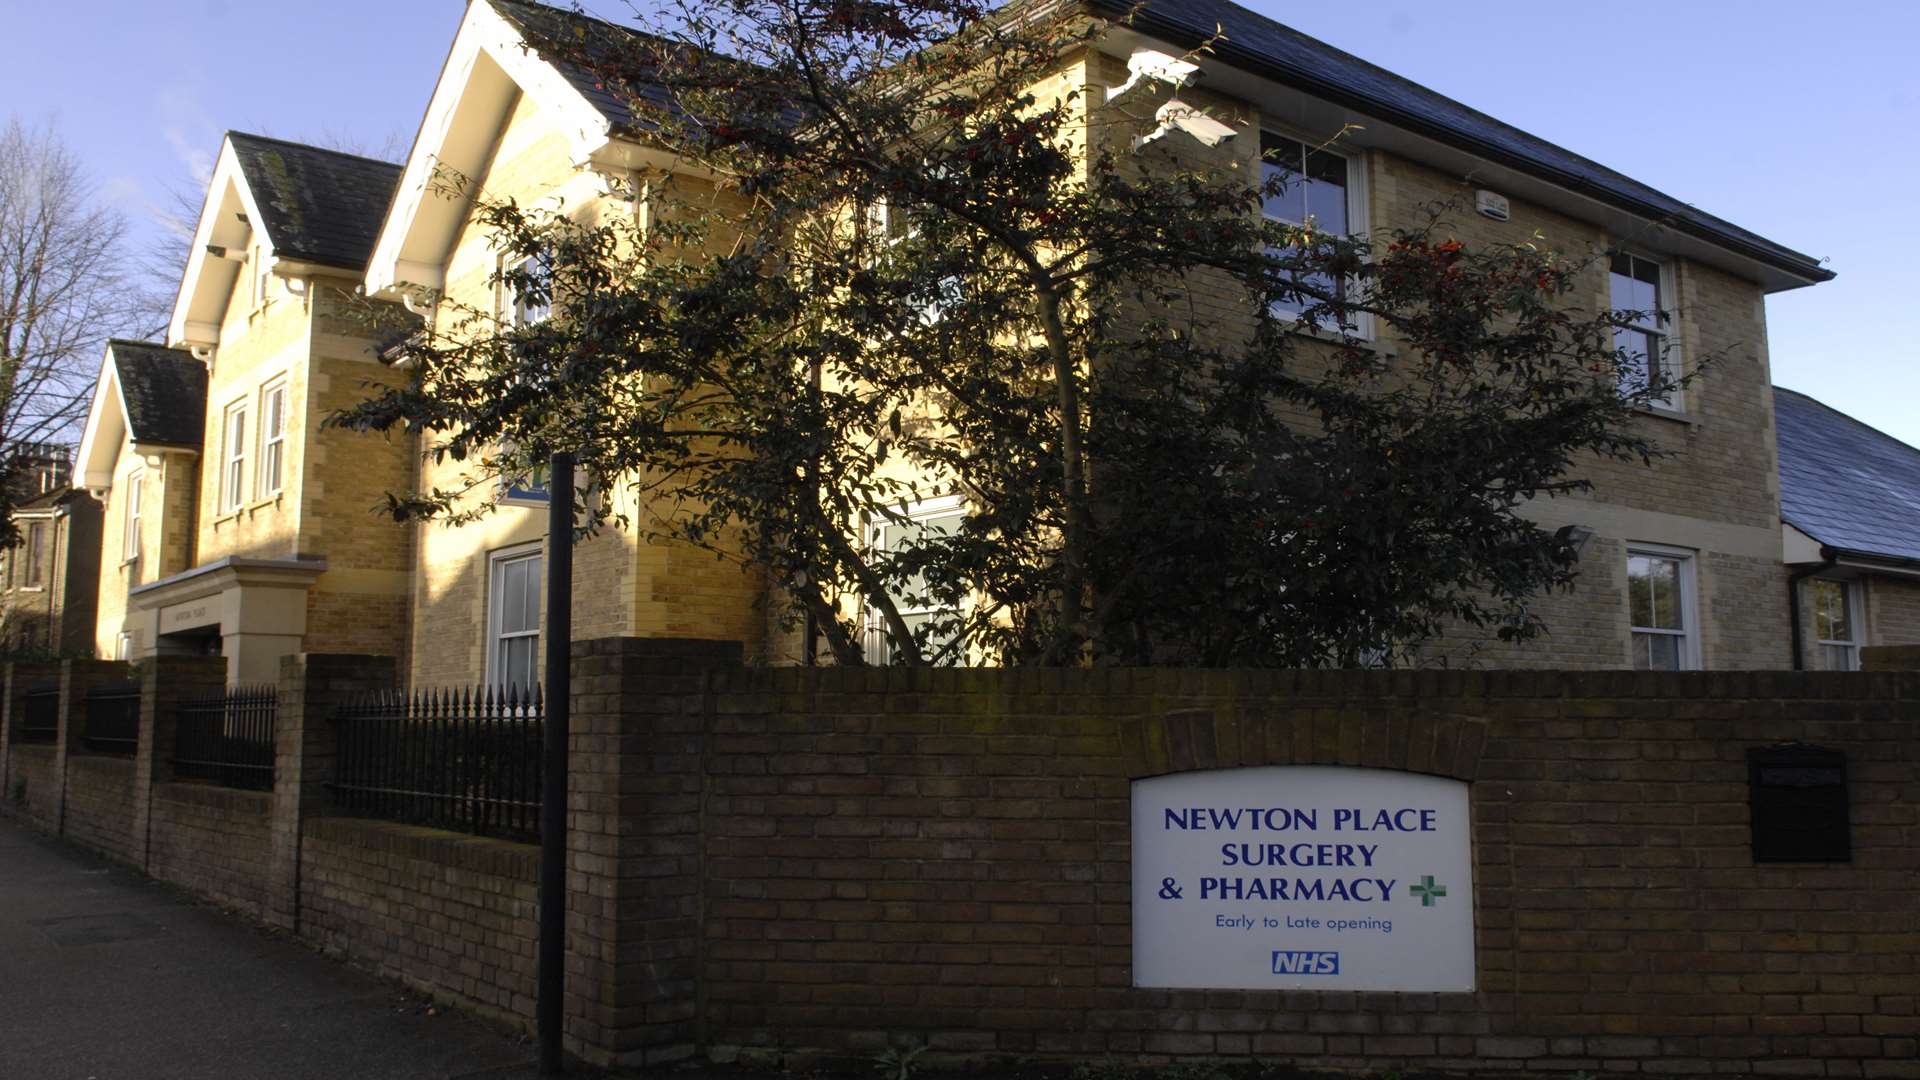 Newton Place Surgery where Dr Wyeth works